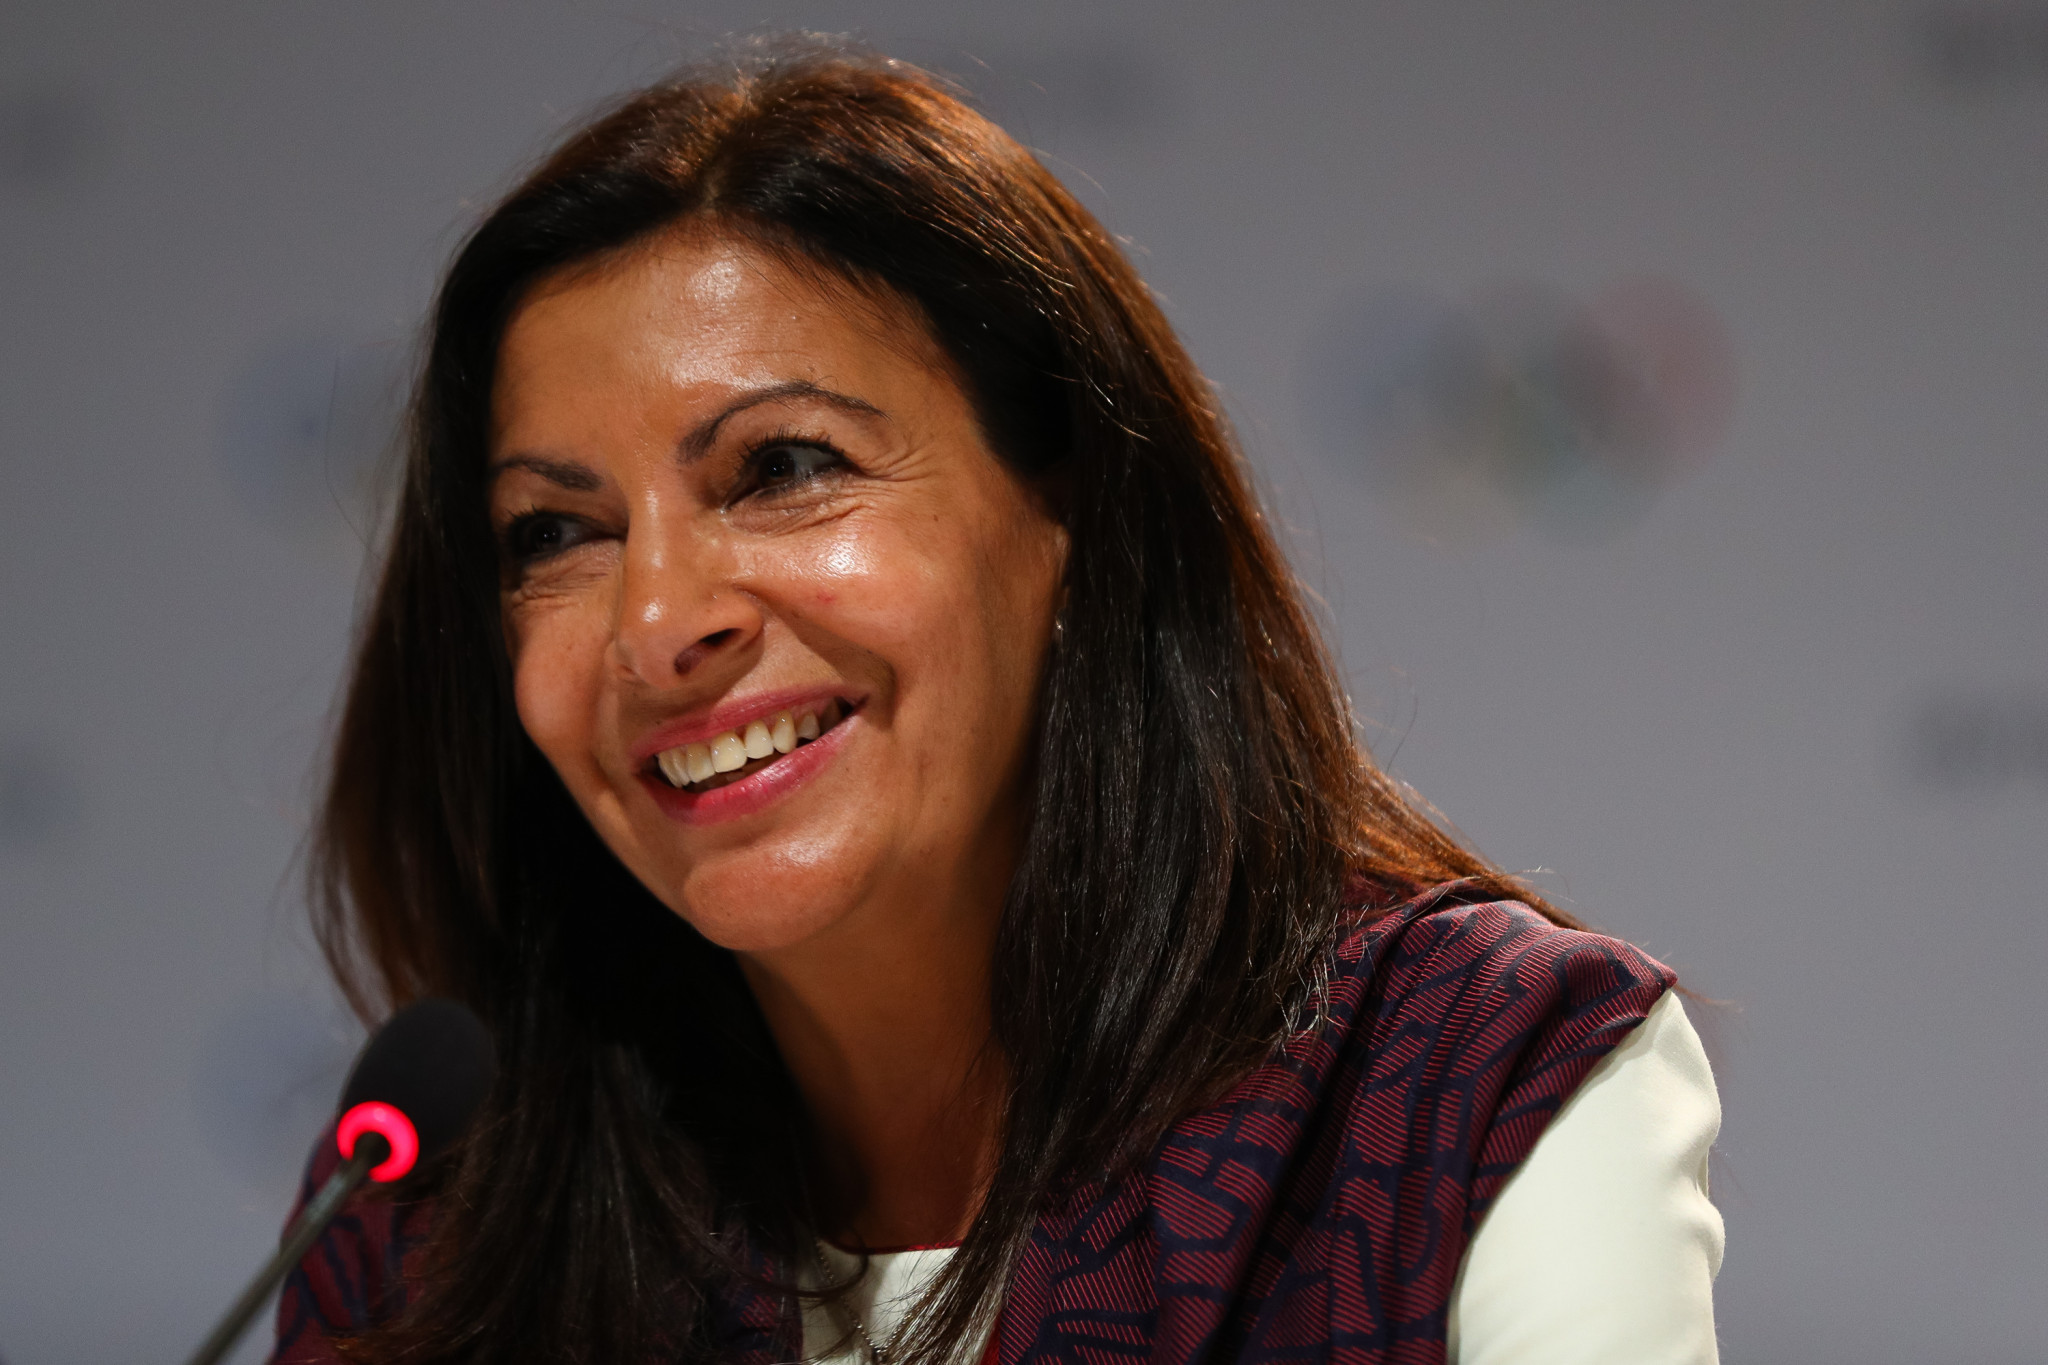 Paris Mayor Anne Hidalgo said "we will make a decision when the moment comes" on Russia and Belarus' involvement at Paris 2024 ©Getty Images